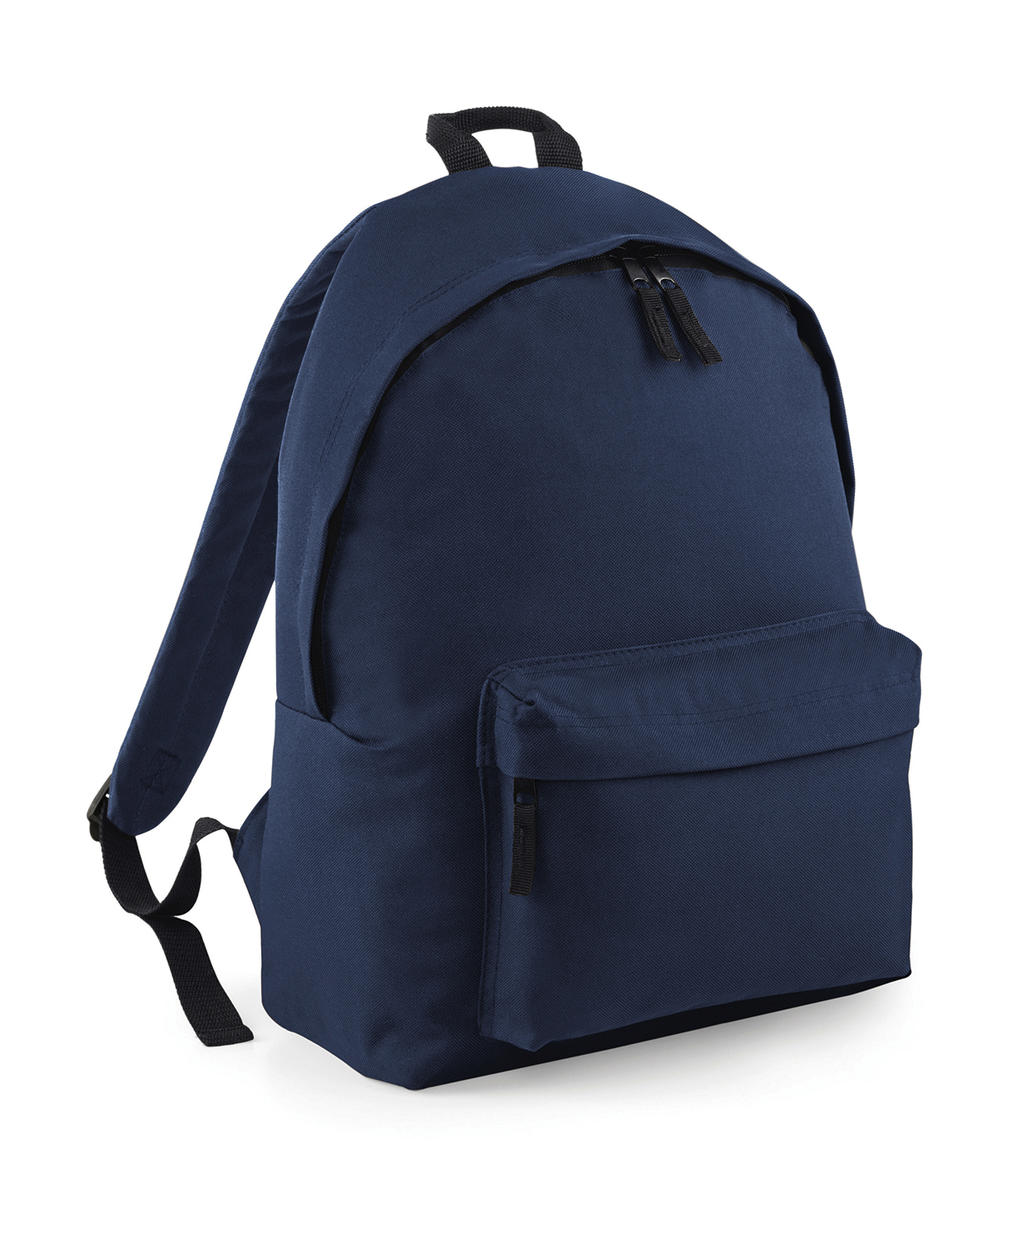  Maxi Fashion Backpack in Farbe French Navy